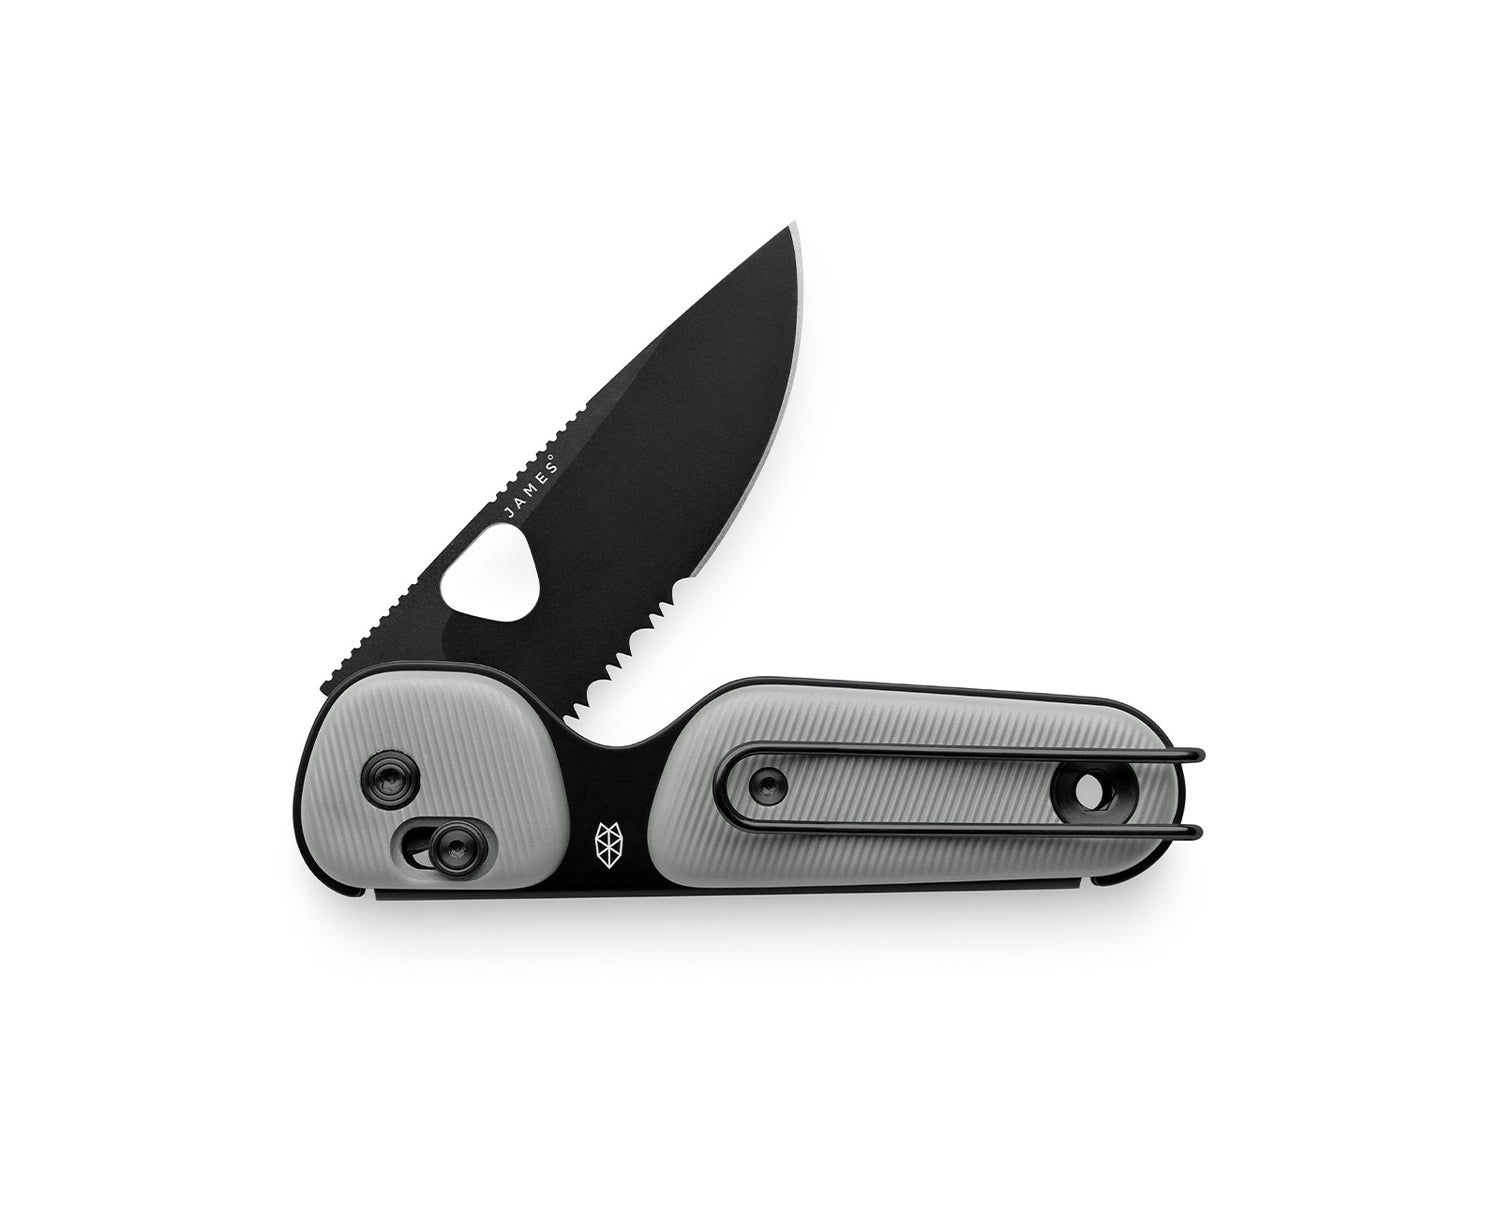 The Redstone knife with primer gray handle and serrated, black blade.